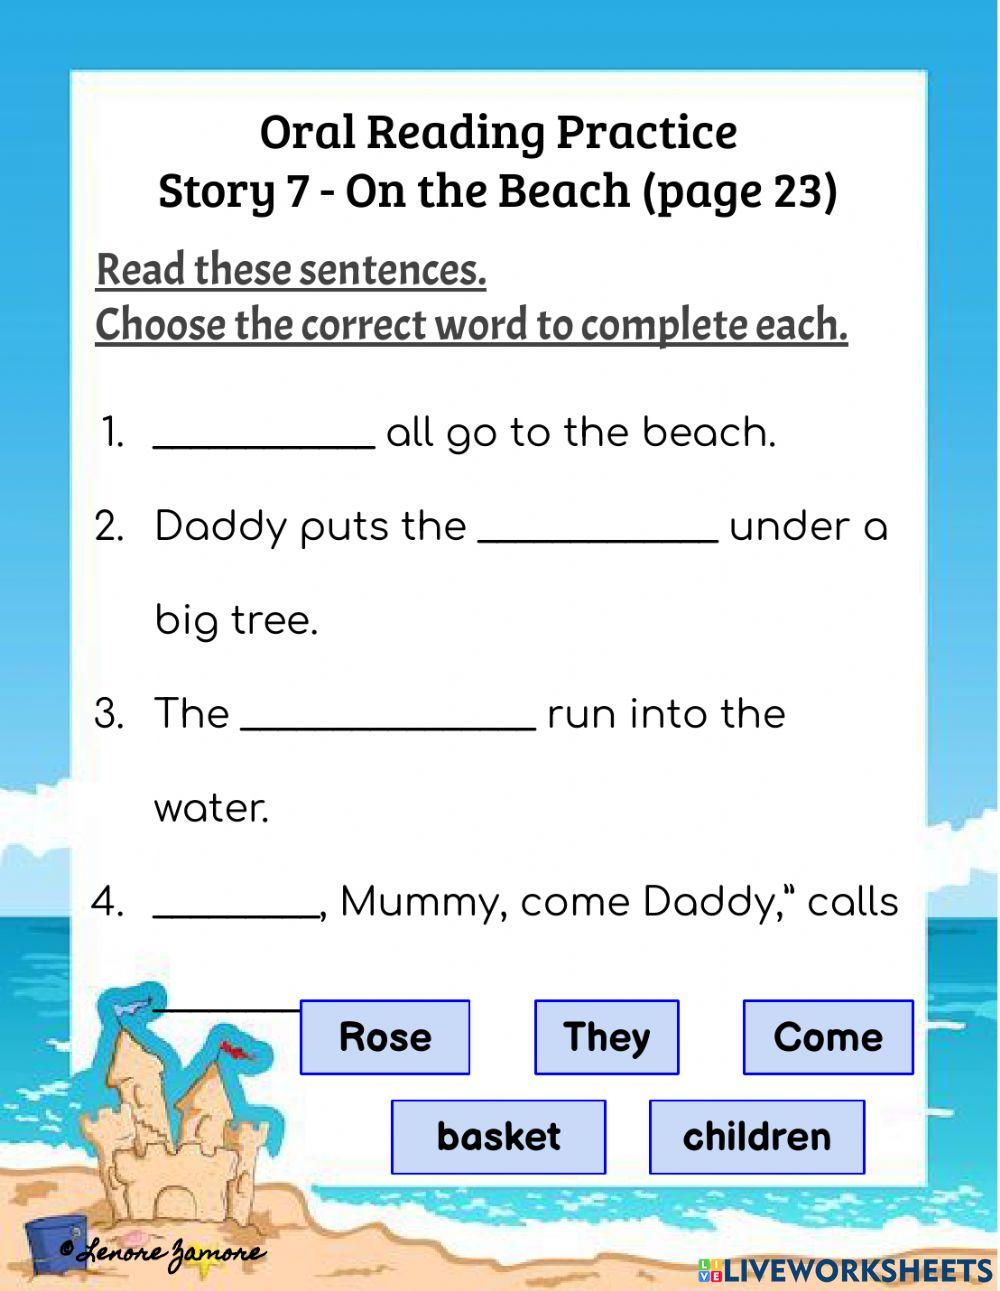 Oral Reading Practice - Story 7